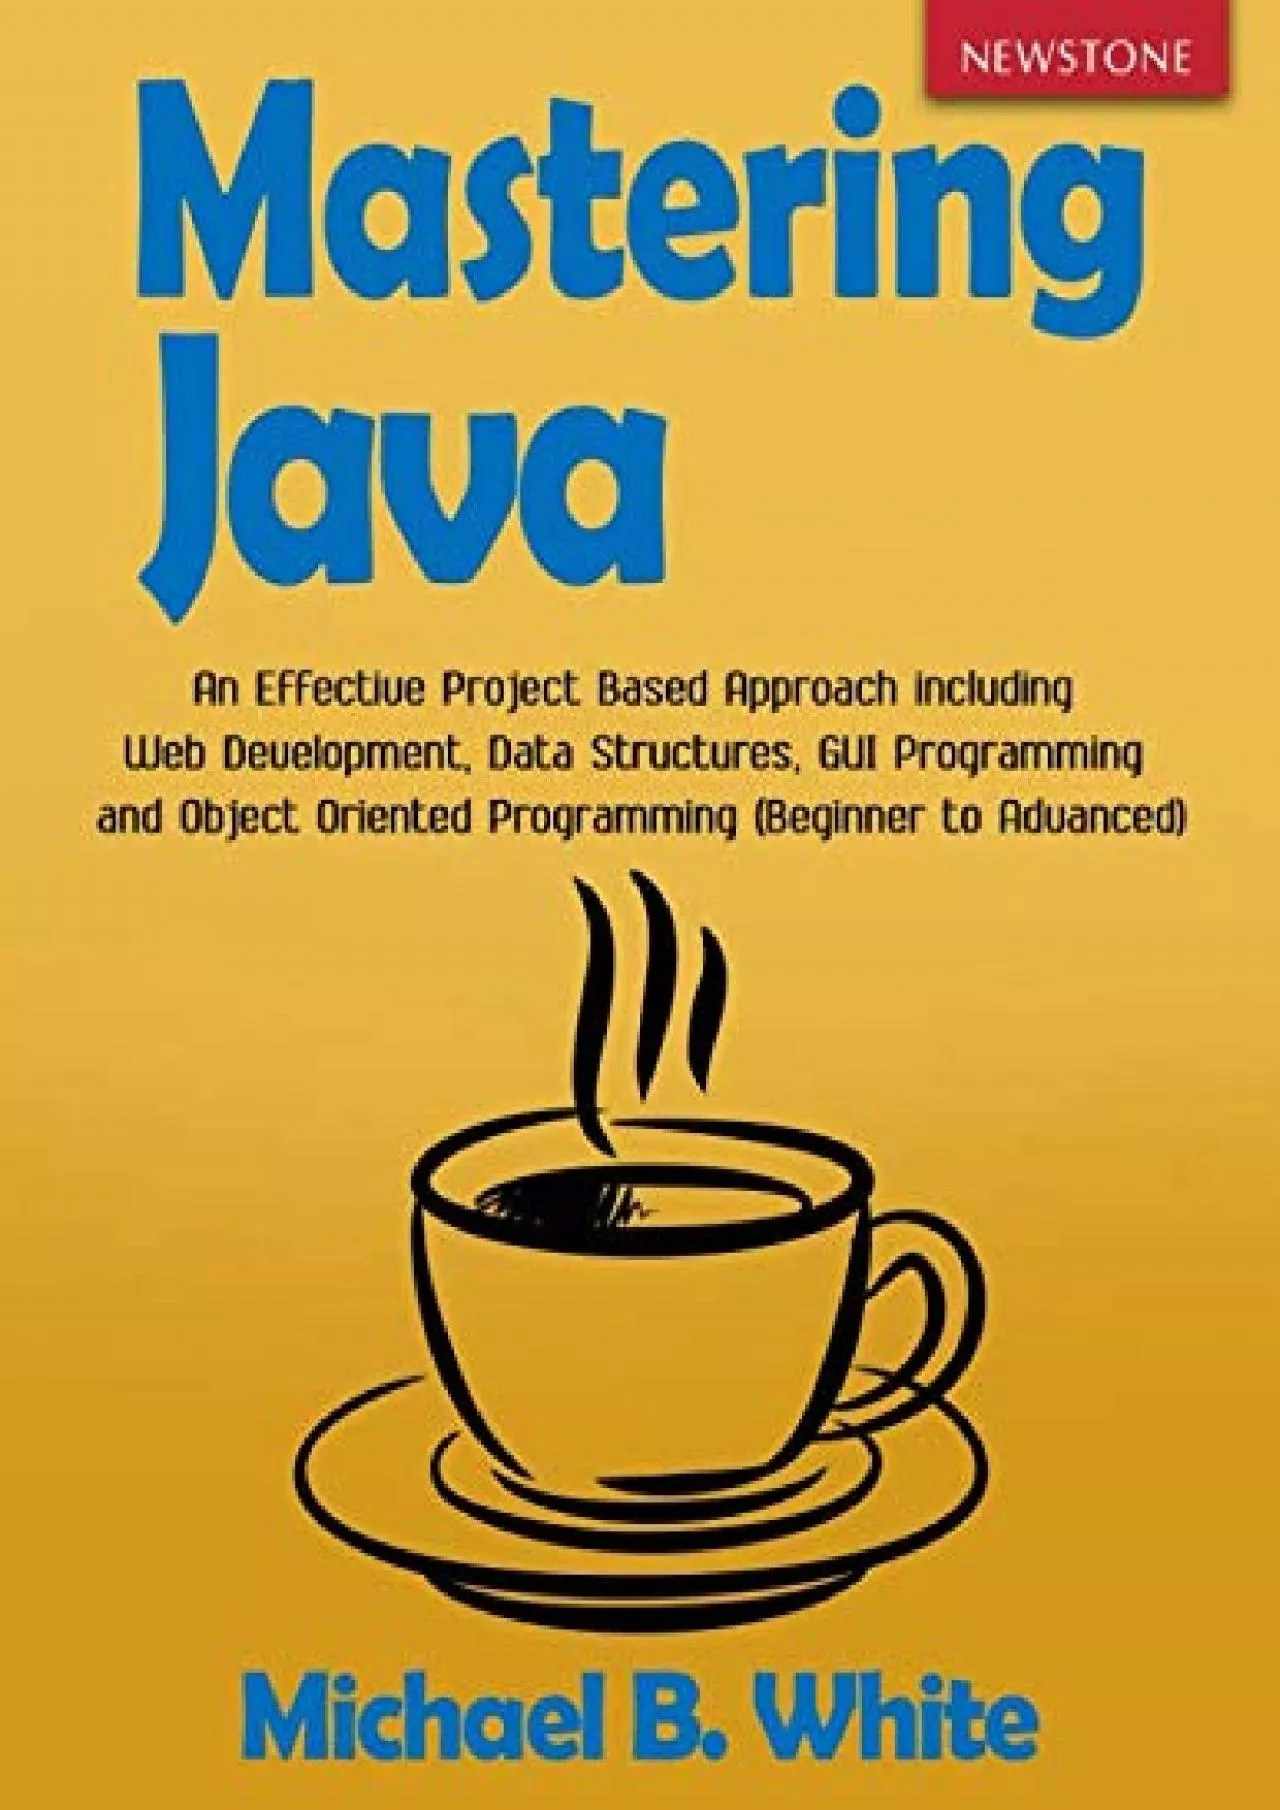 [READING BOOK]-Mastering Java: An Effective Project Based Approach including Web Development,